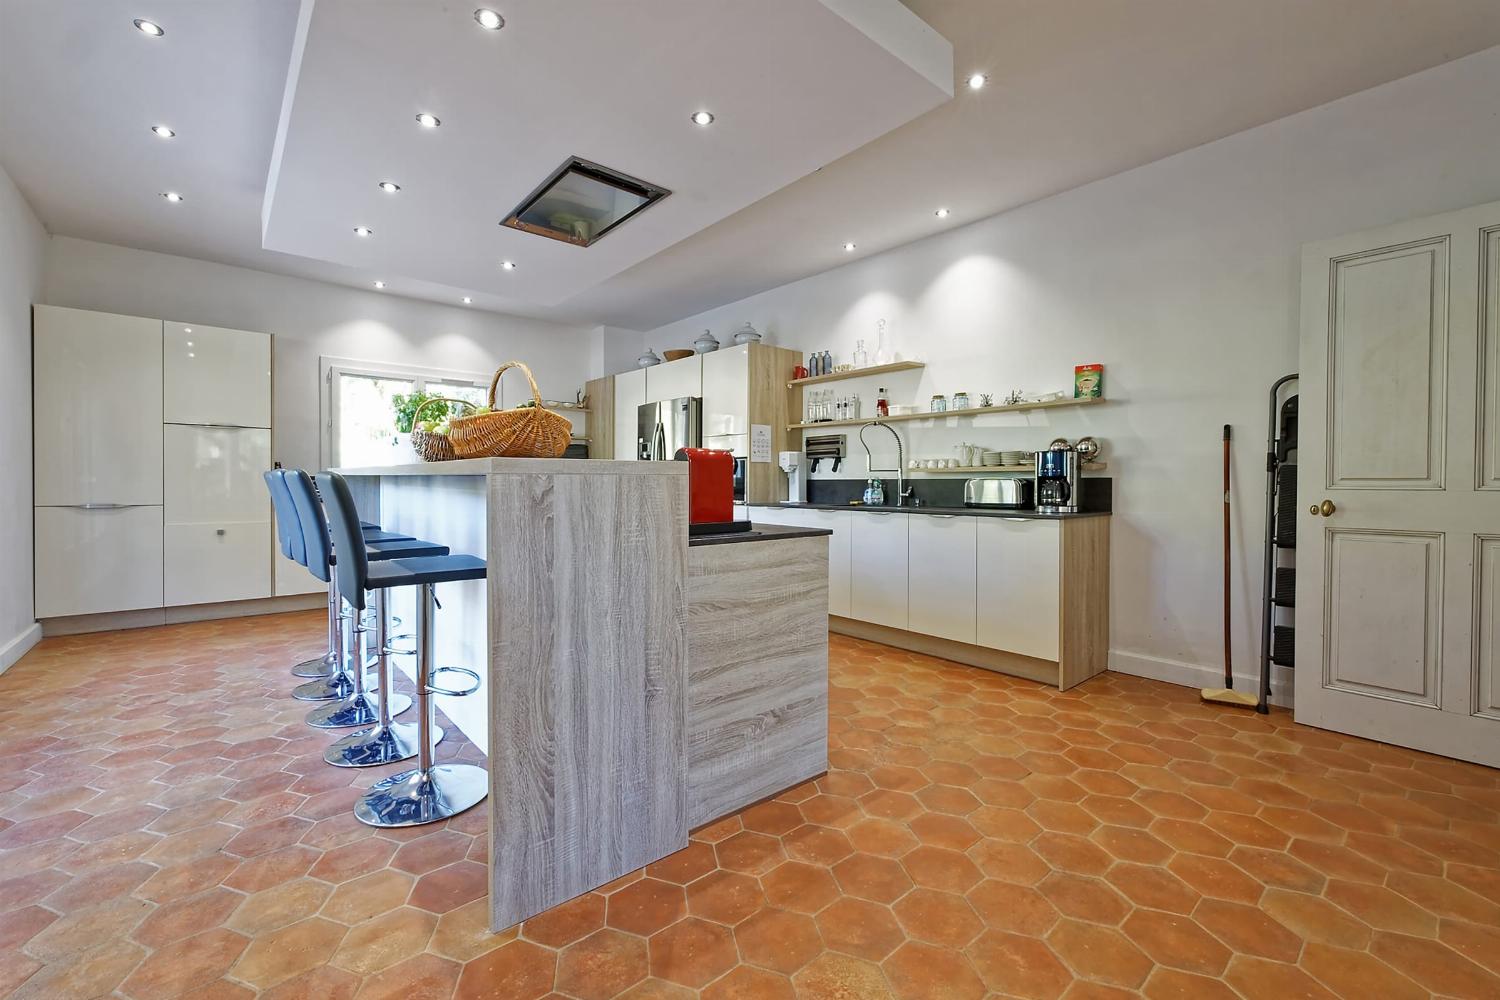 Kitchen | Vacation accommodation in Provence